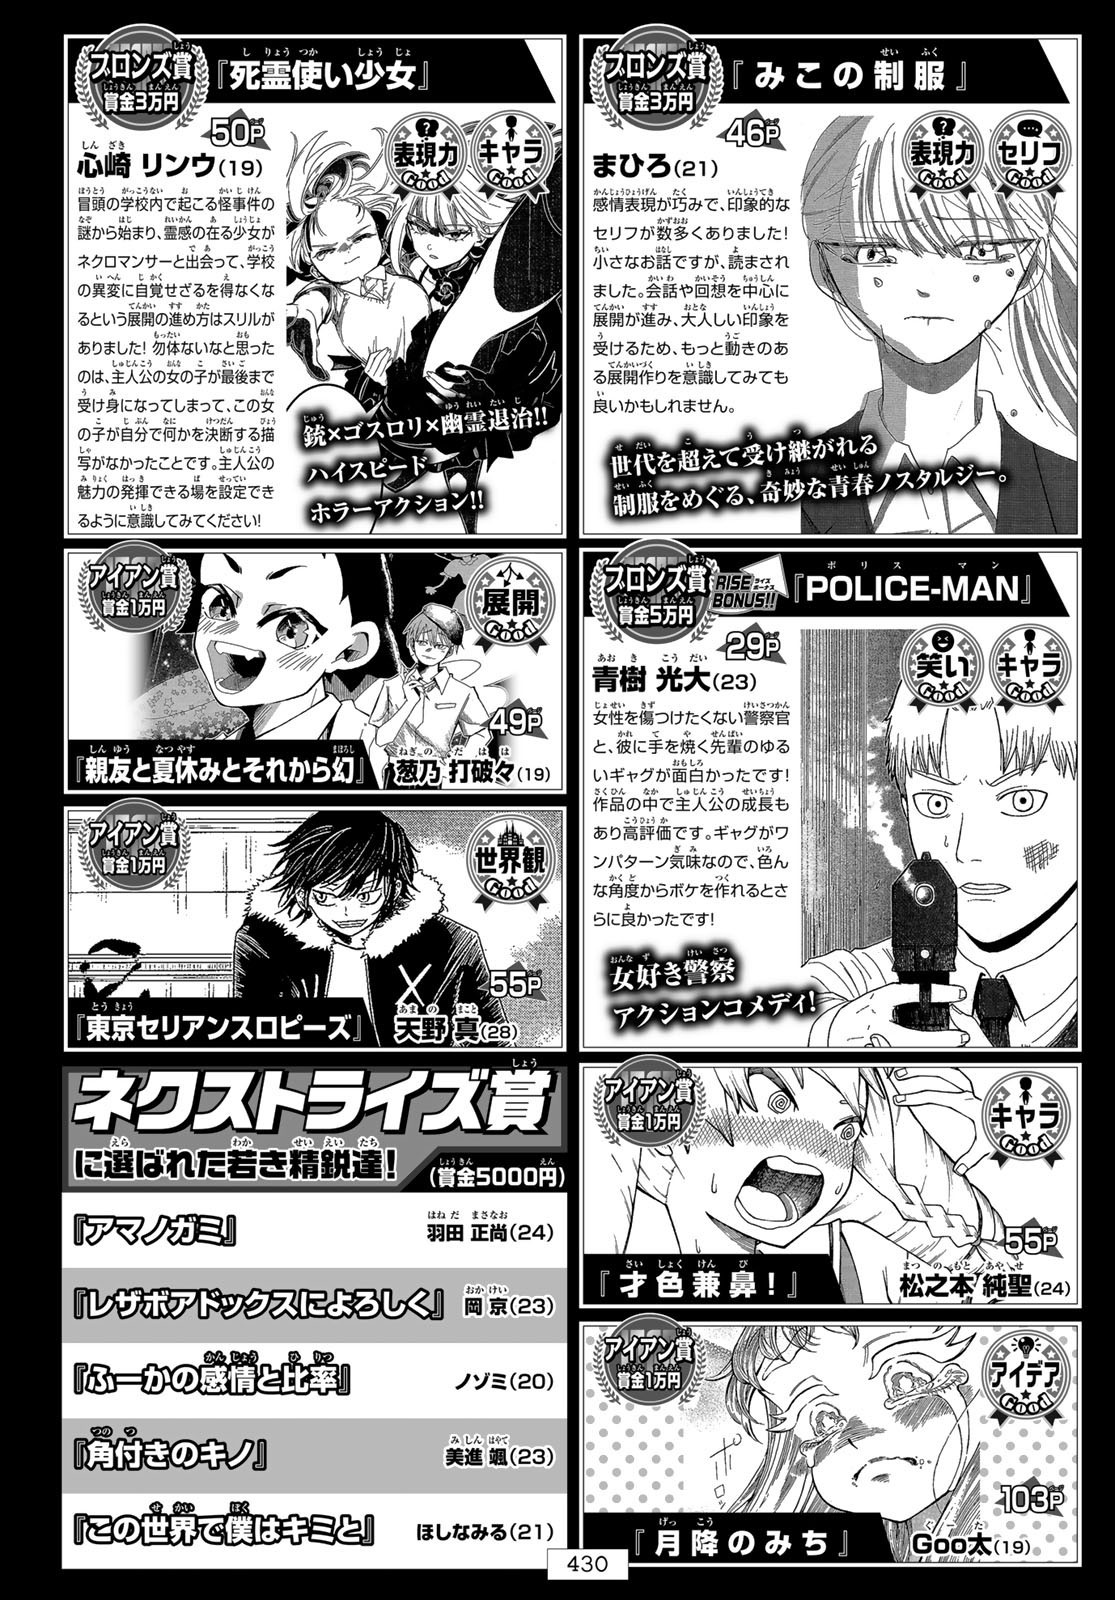 Weekly Shōnen Magazine - 週刊少年マガジン - Chapter 2024-25 - Page 429